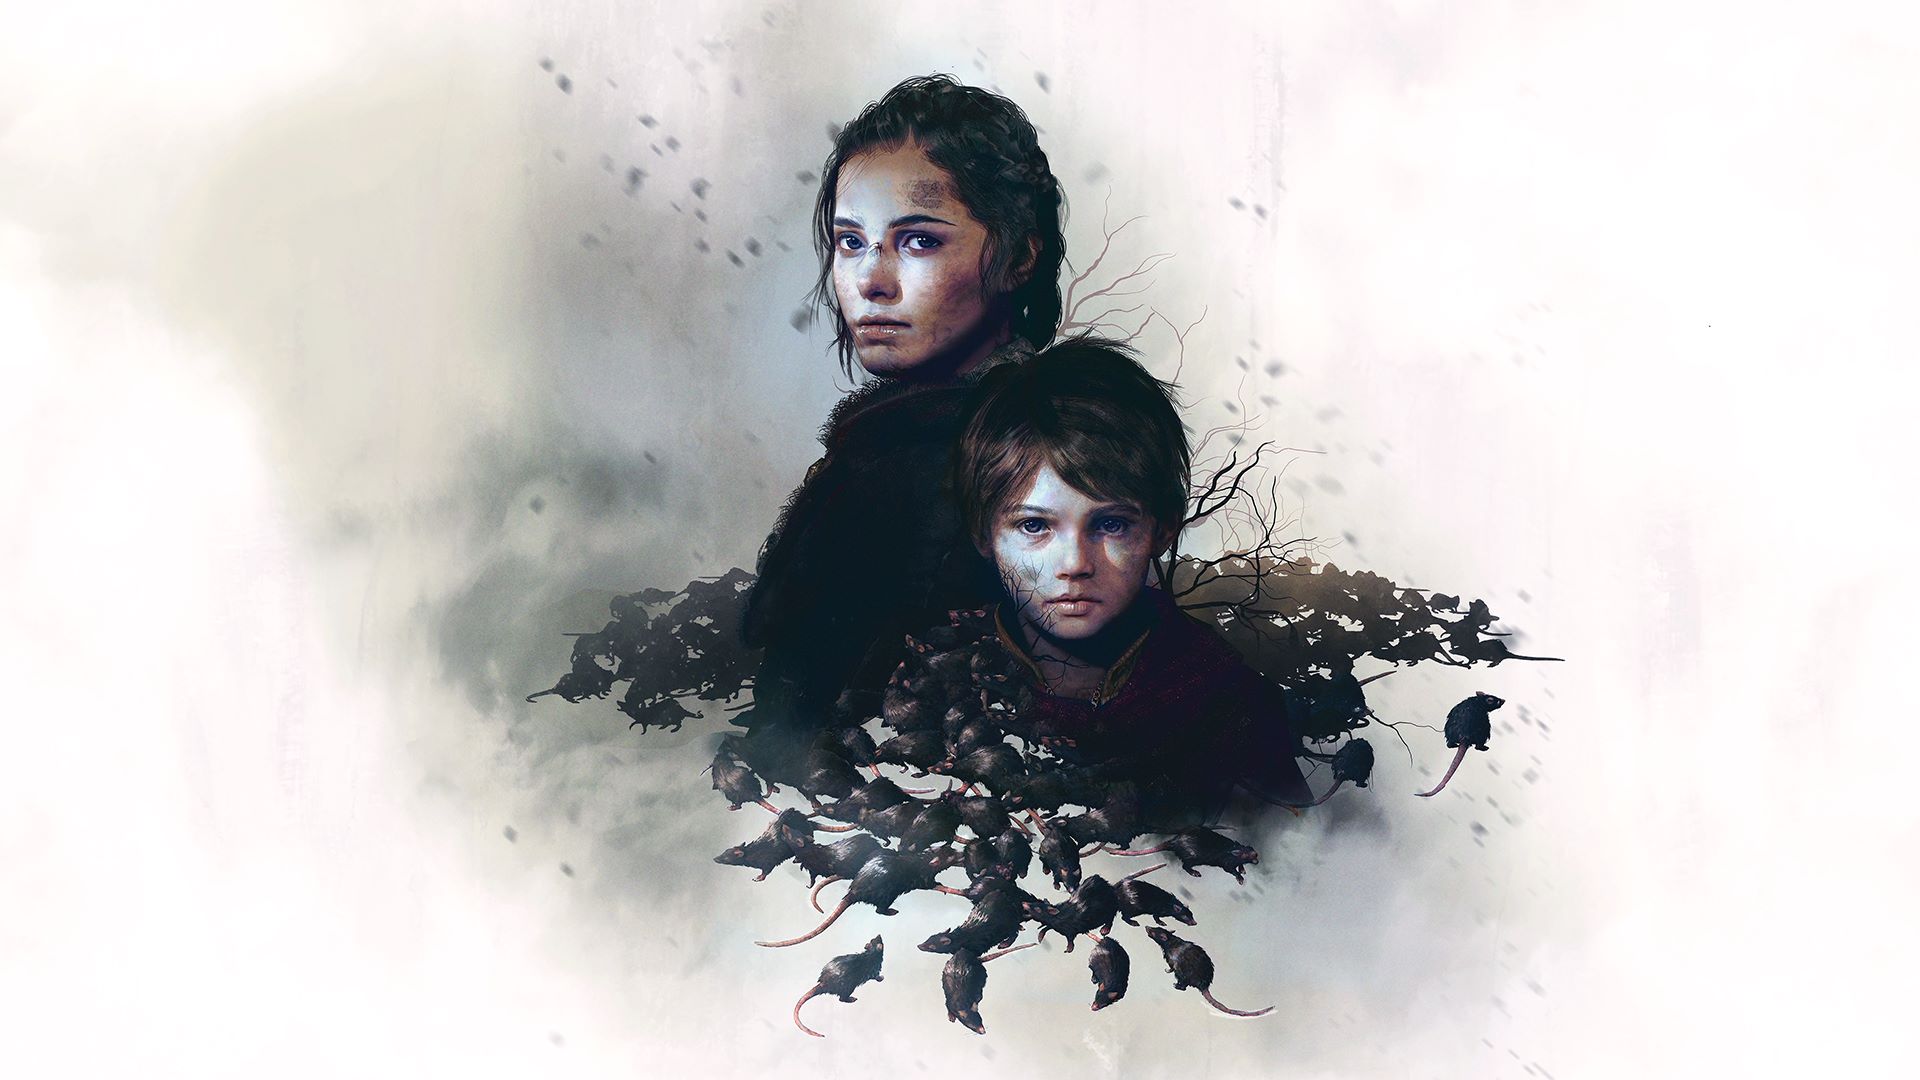 A Plague Tale: Innocence (PS4) Review: Gorgeous and creepy story will draw you in